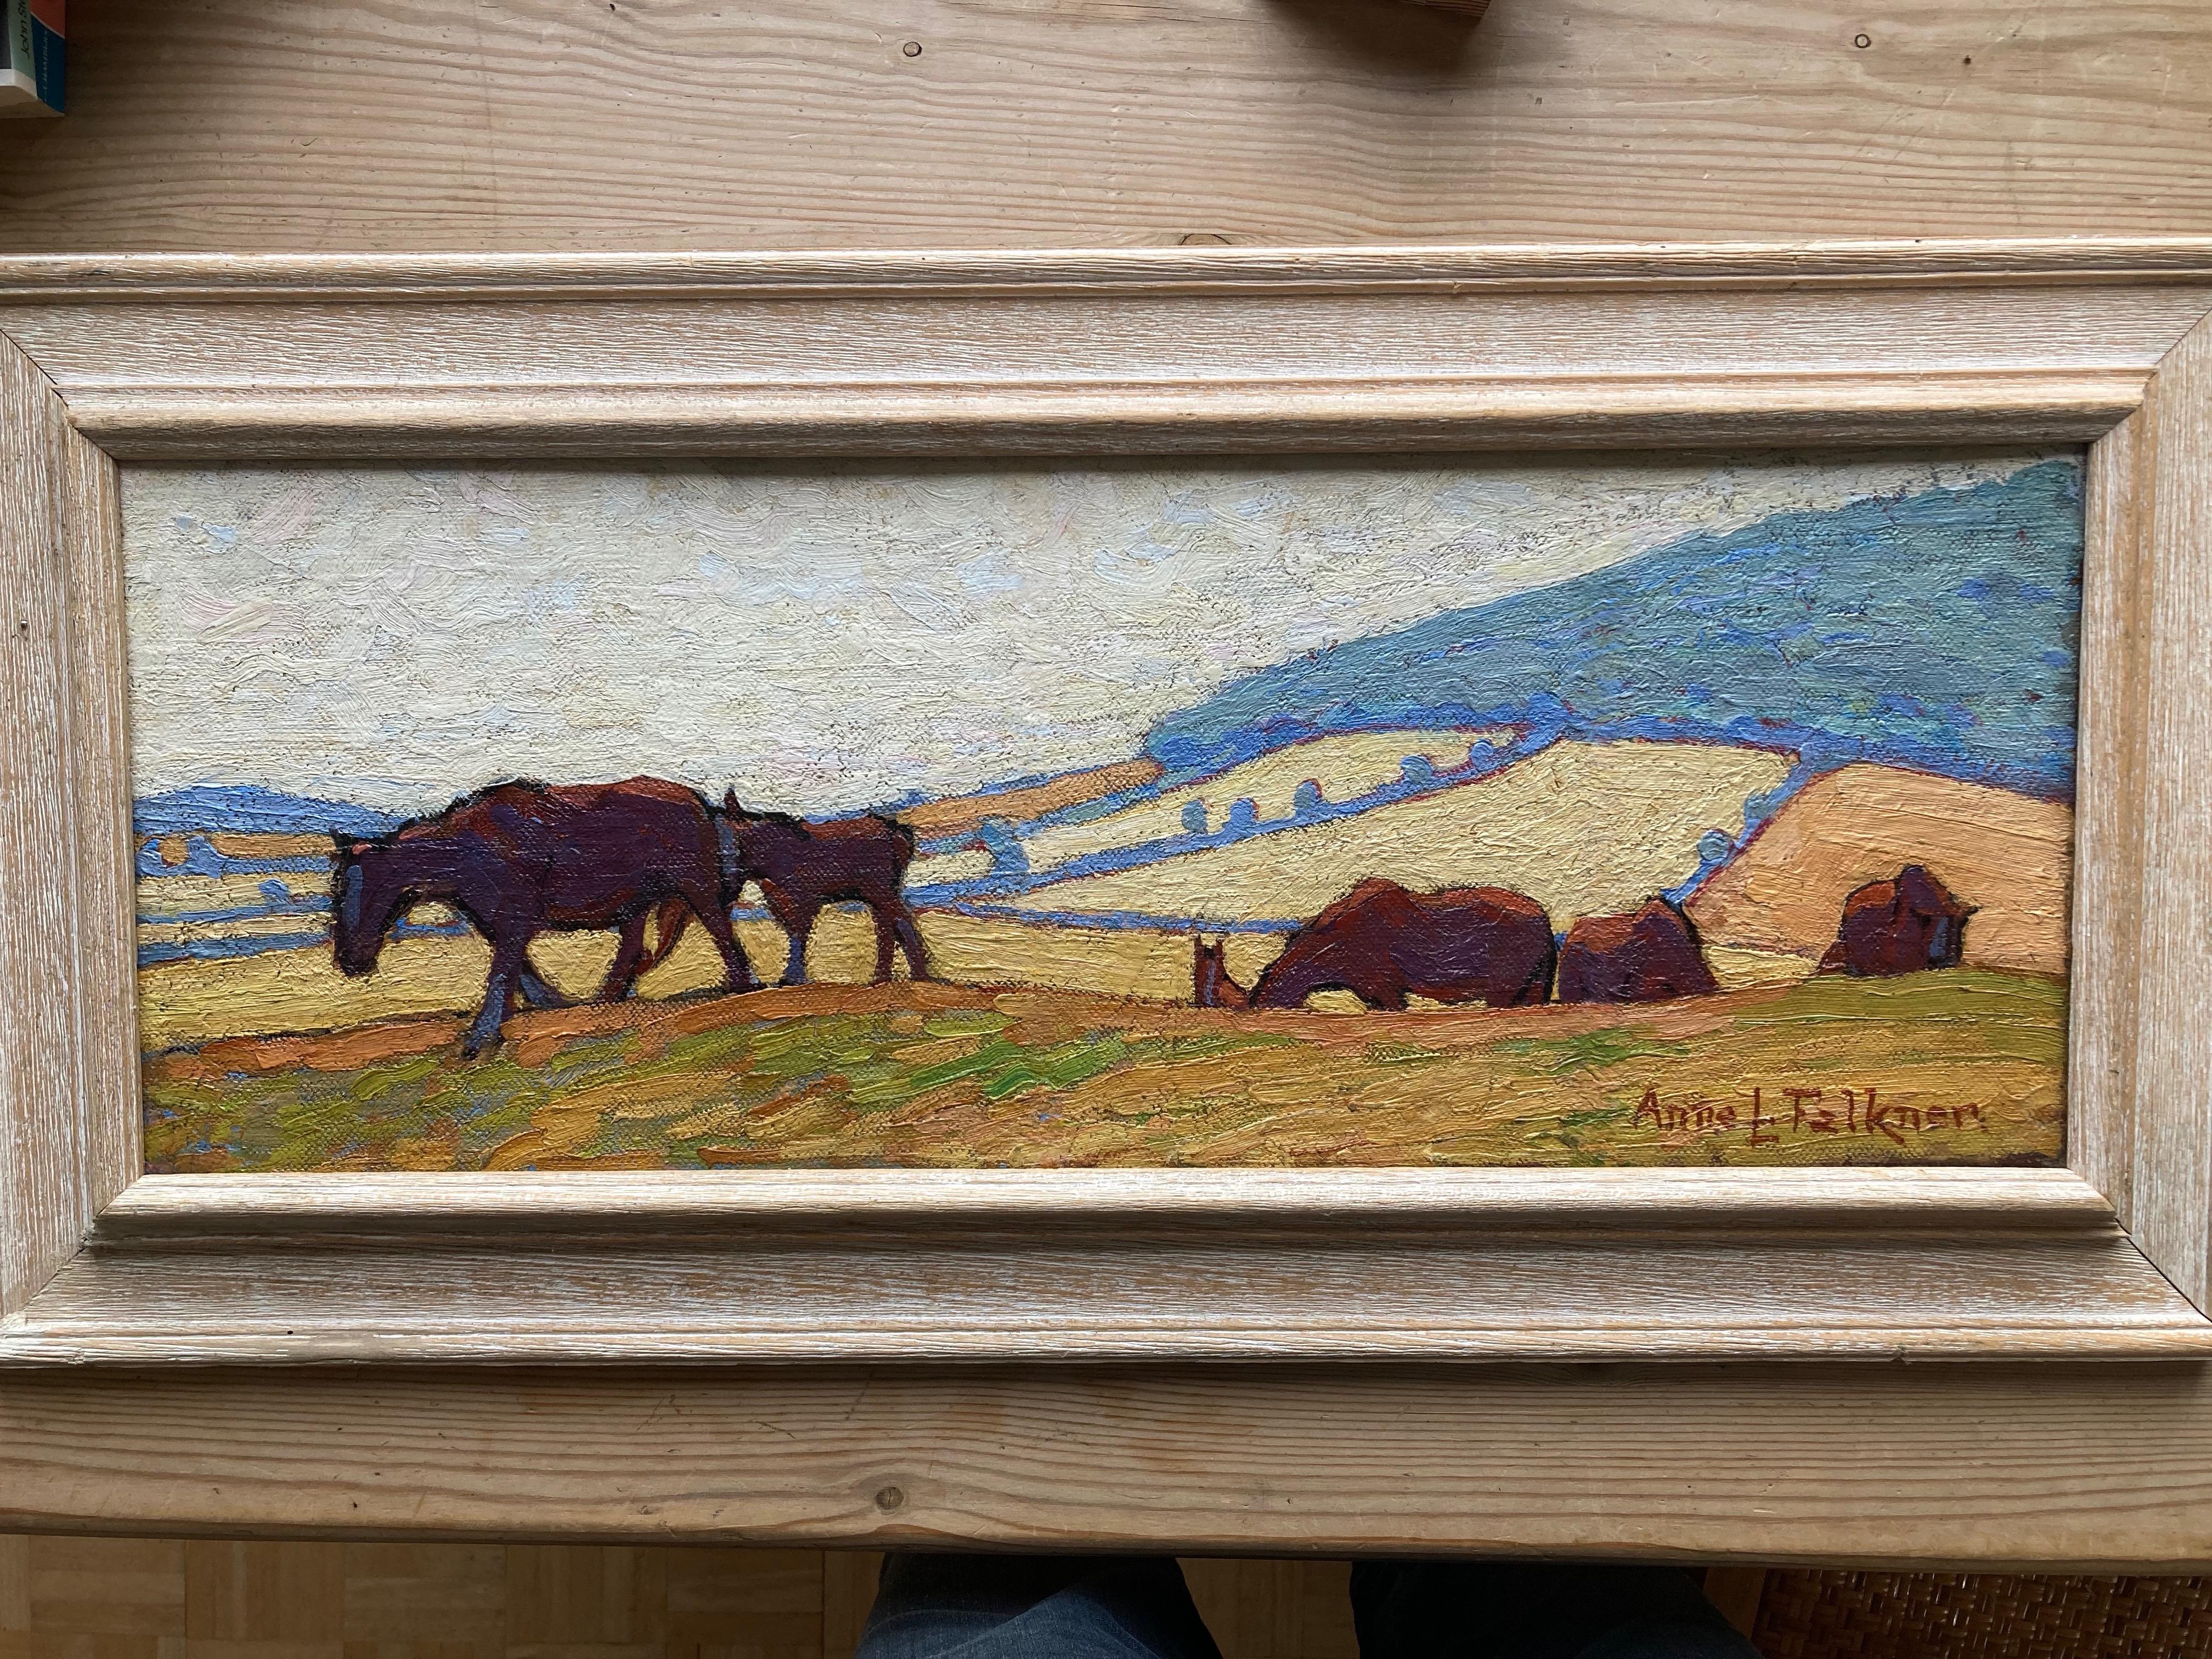 Anne Louise Falkner (1862 -1933)
Horses on the brow of a hill, 
Signed, 
Oil on canvas laid on board,
9 ½  x 24 inches

A wonderful image with a vibrant palette and brushwork.

Anne Louise Falkner was the daughter of a Dorset vicar and the sister of